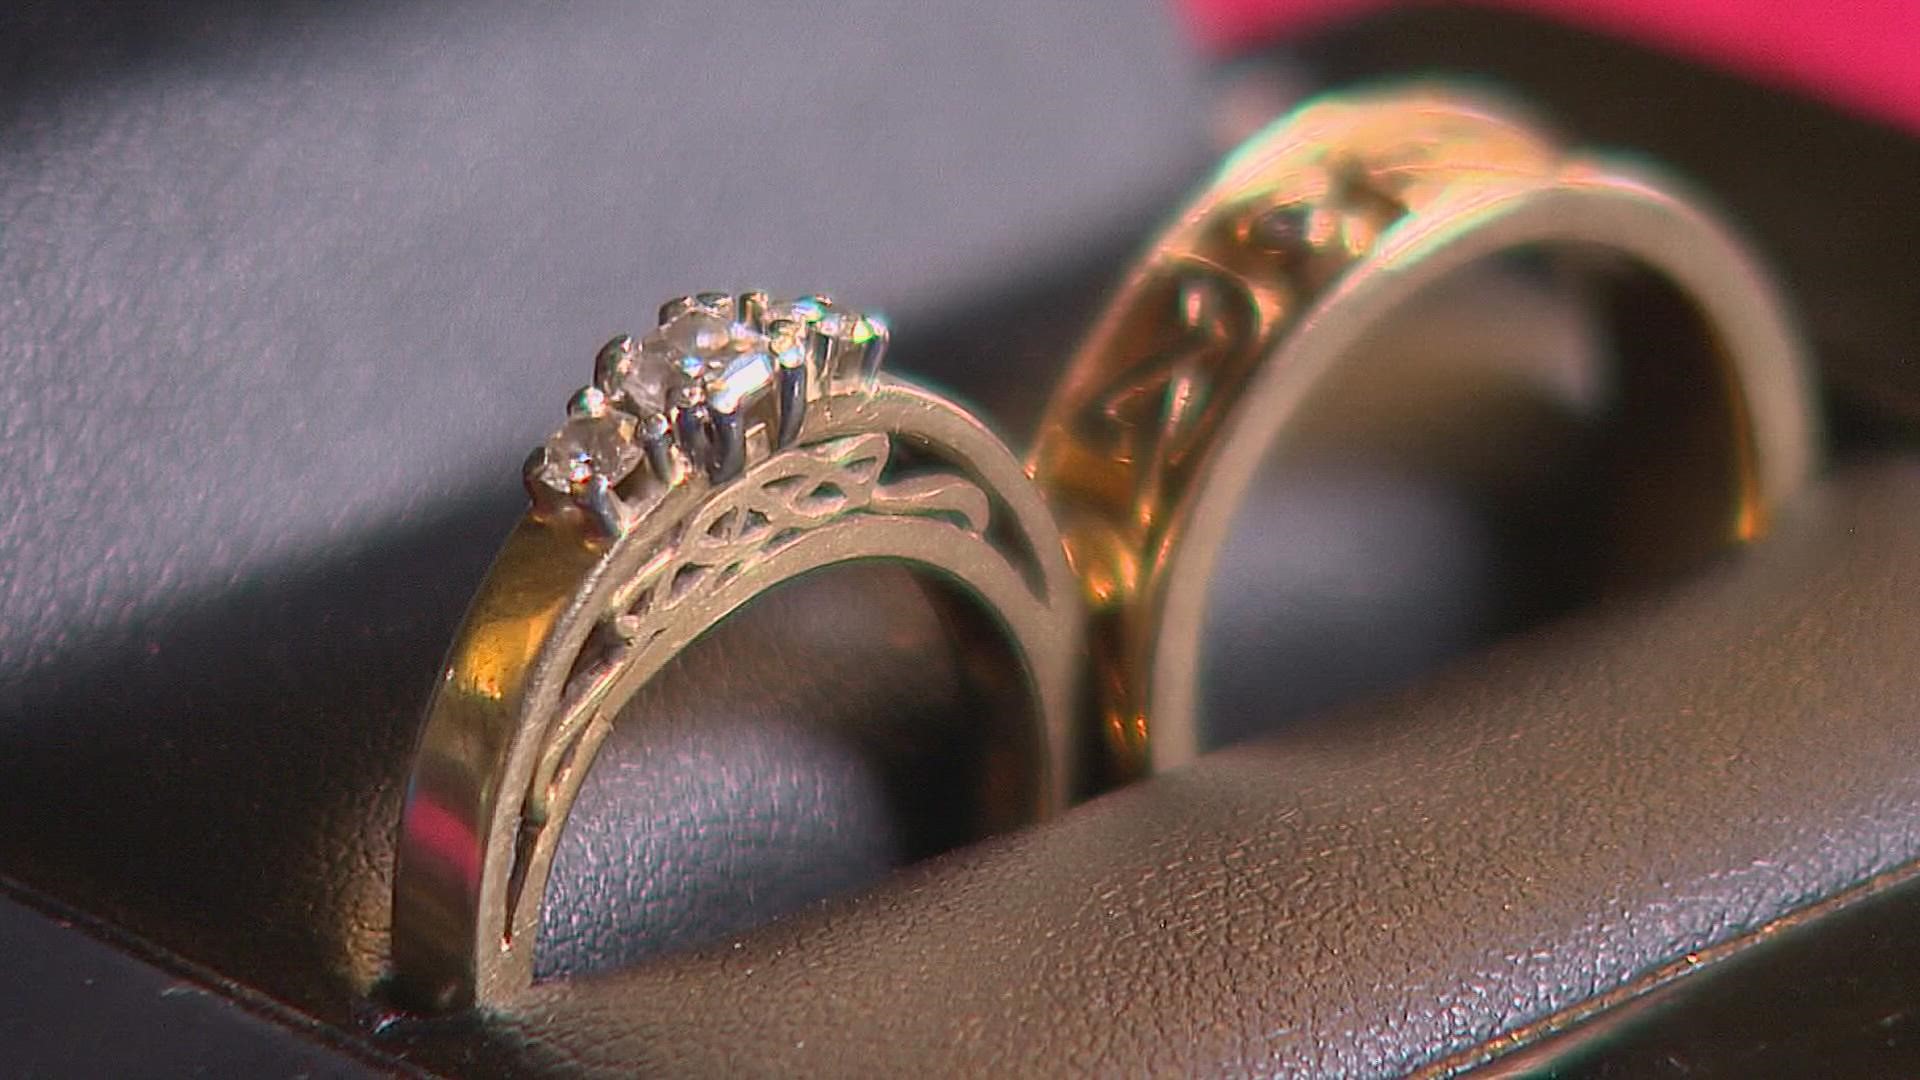 The Mahar-Wieser family was vacationing in Mexico in April 2019 when a wedding ring vanished.